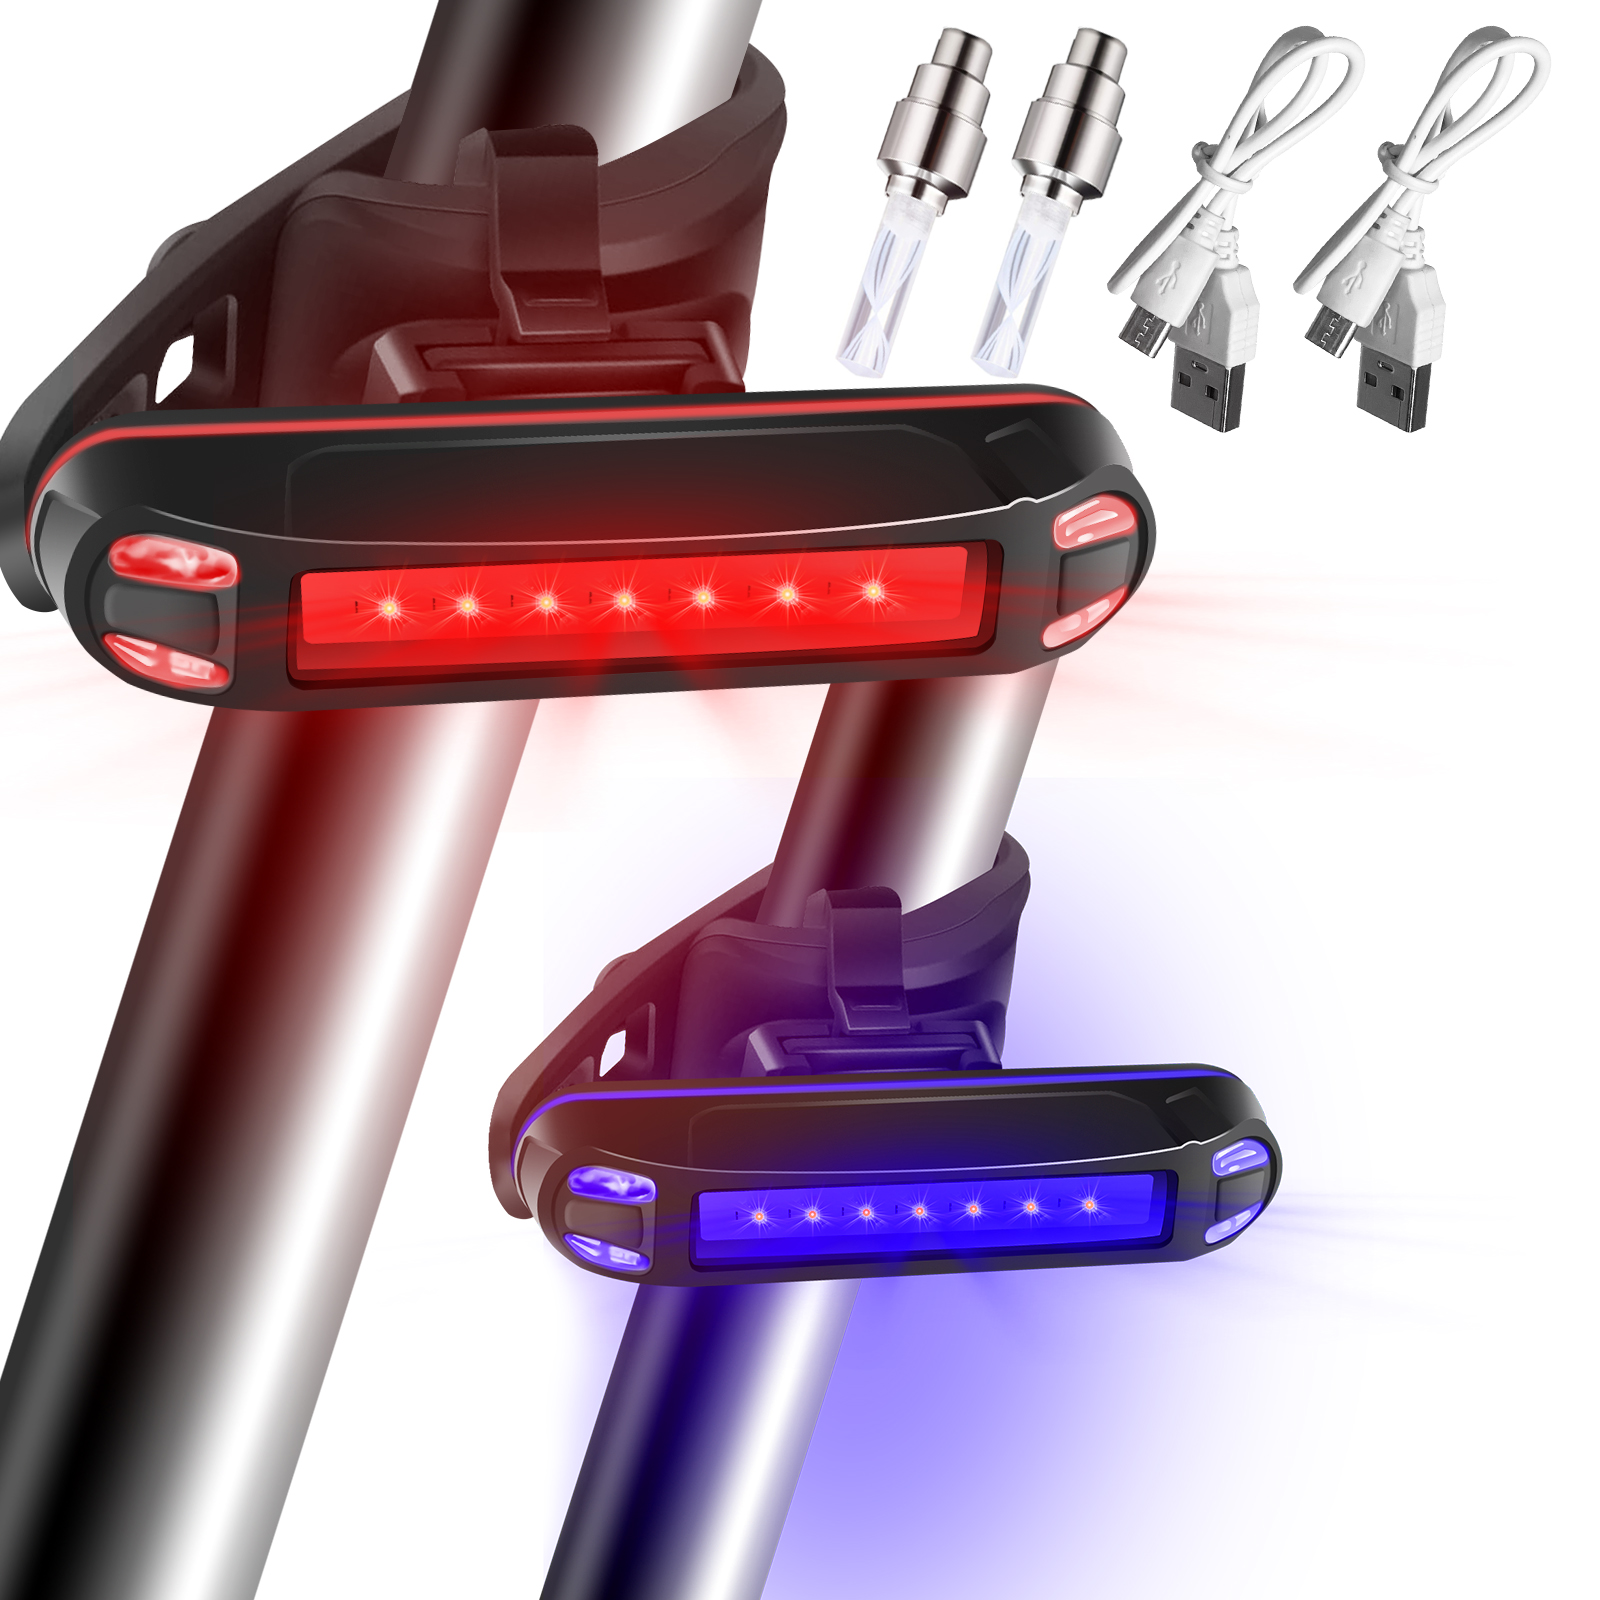  YLUBIK Bike Tail Light 2 Pack USB Rechargeable, Bright Bicycle Rear Light, Cycling Safety Flashlight and Tyre Wheel Valve Cap Light, 500mah Lithium Battery, 5 Light Mode Options(2 USB Cables Included)       